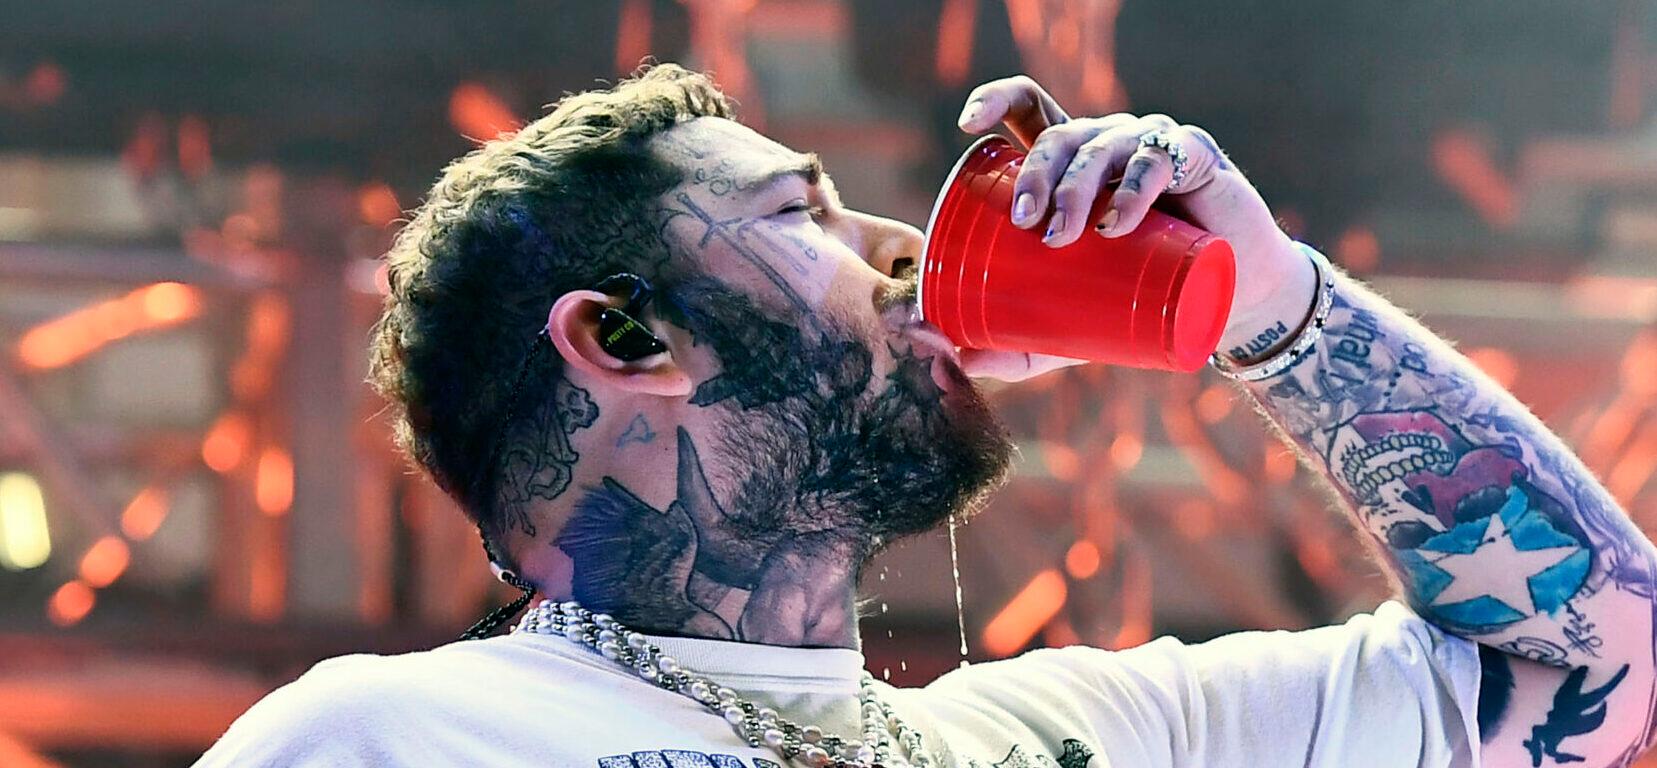 Post Malone performing at Reading Festival 2021